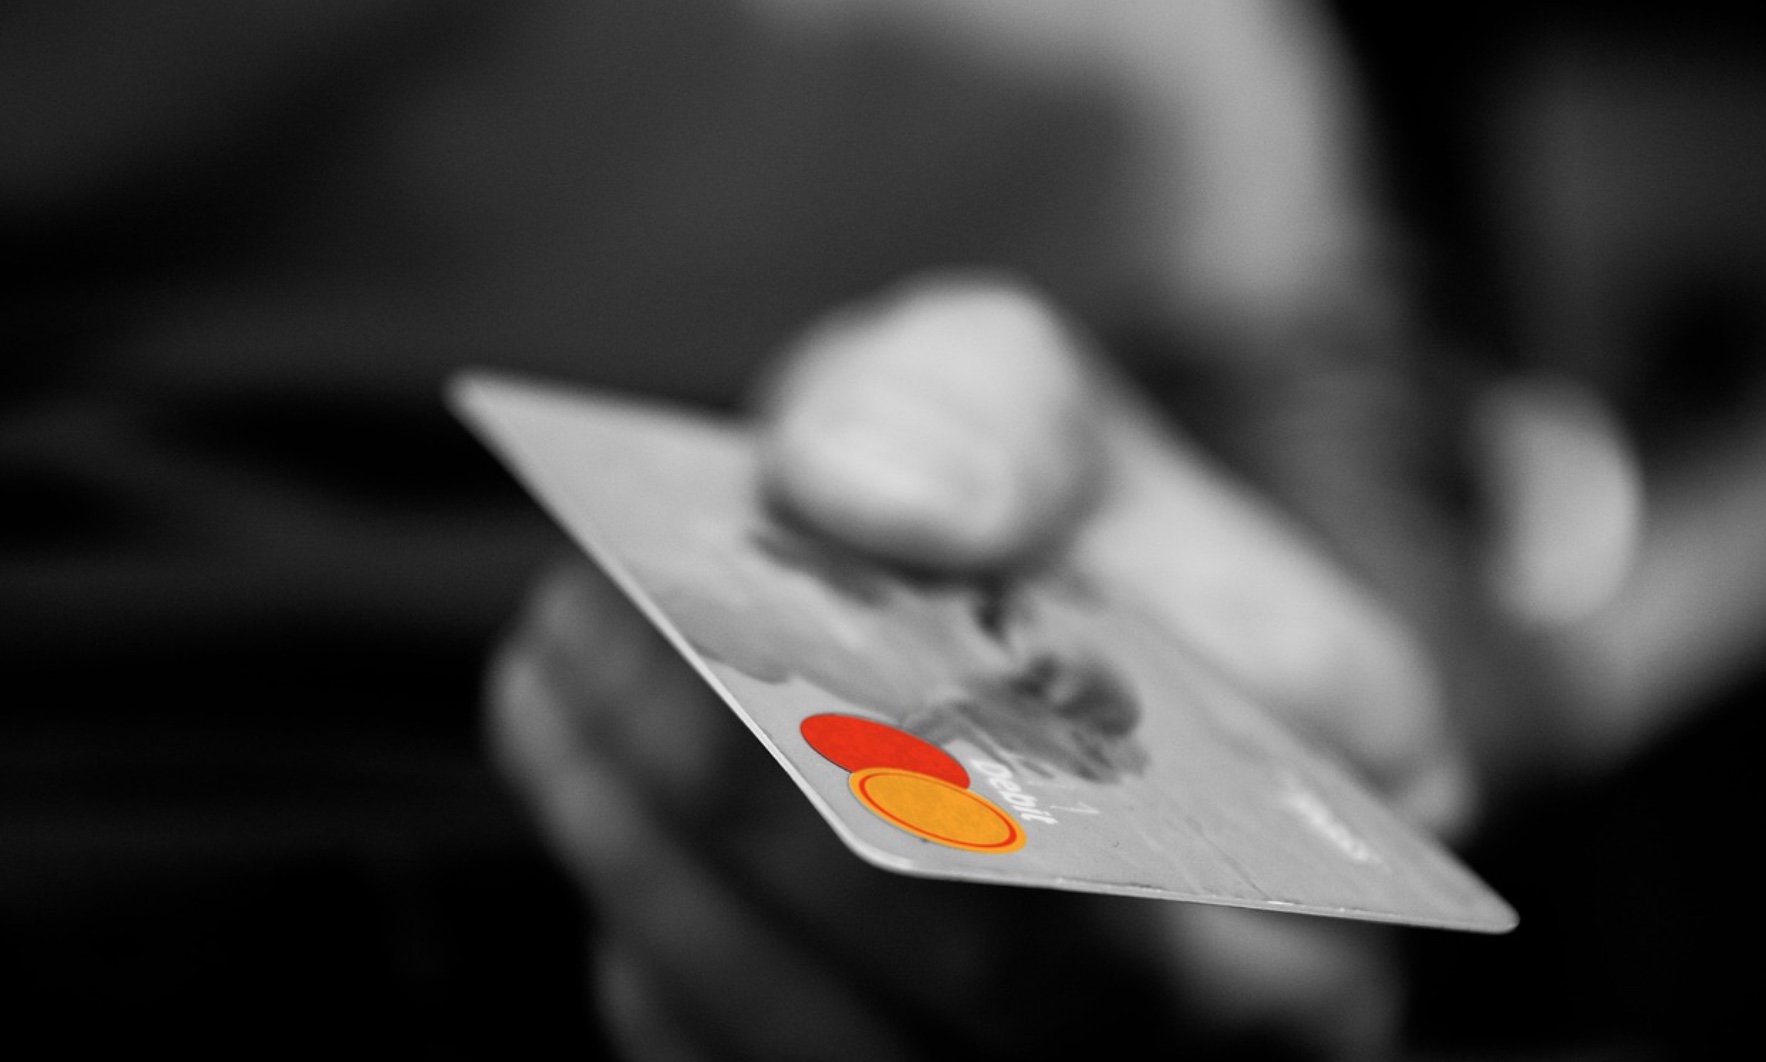 <p>Credit purchases offer a delay in payment and often come with zero fraud liability, unlike debit transactions that immediately deduct funds from your account. Implementing these precautions can help mitigate the risks associated with using your card at gas pumps.<br>  </p>